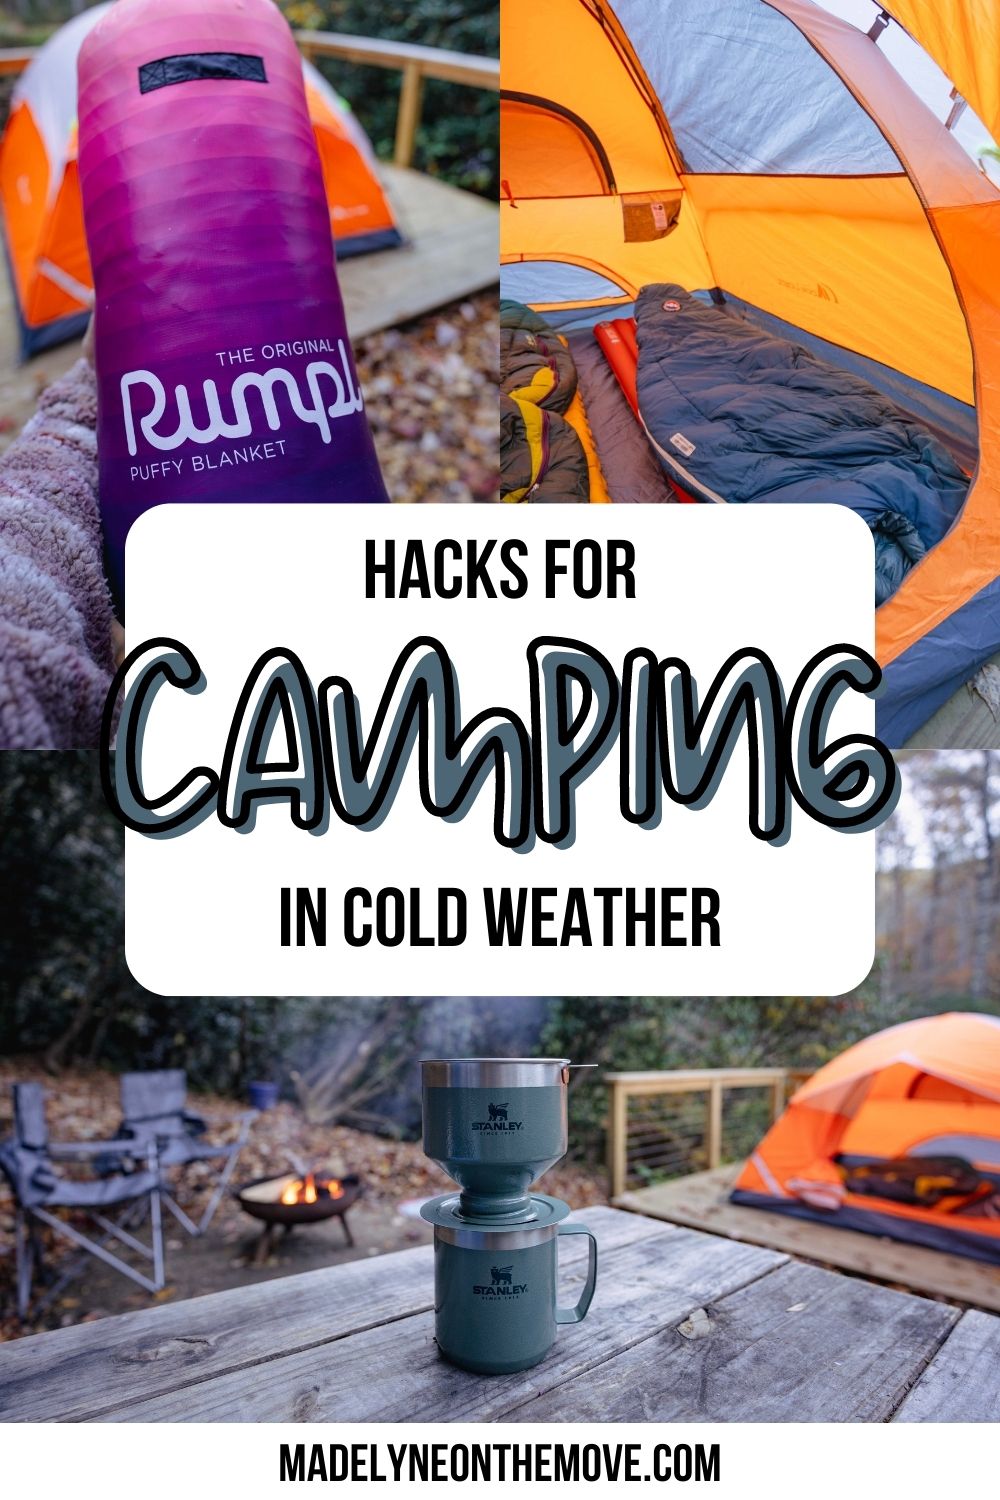 Hacks for keeping warm in a tent